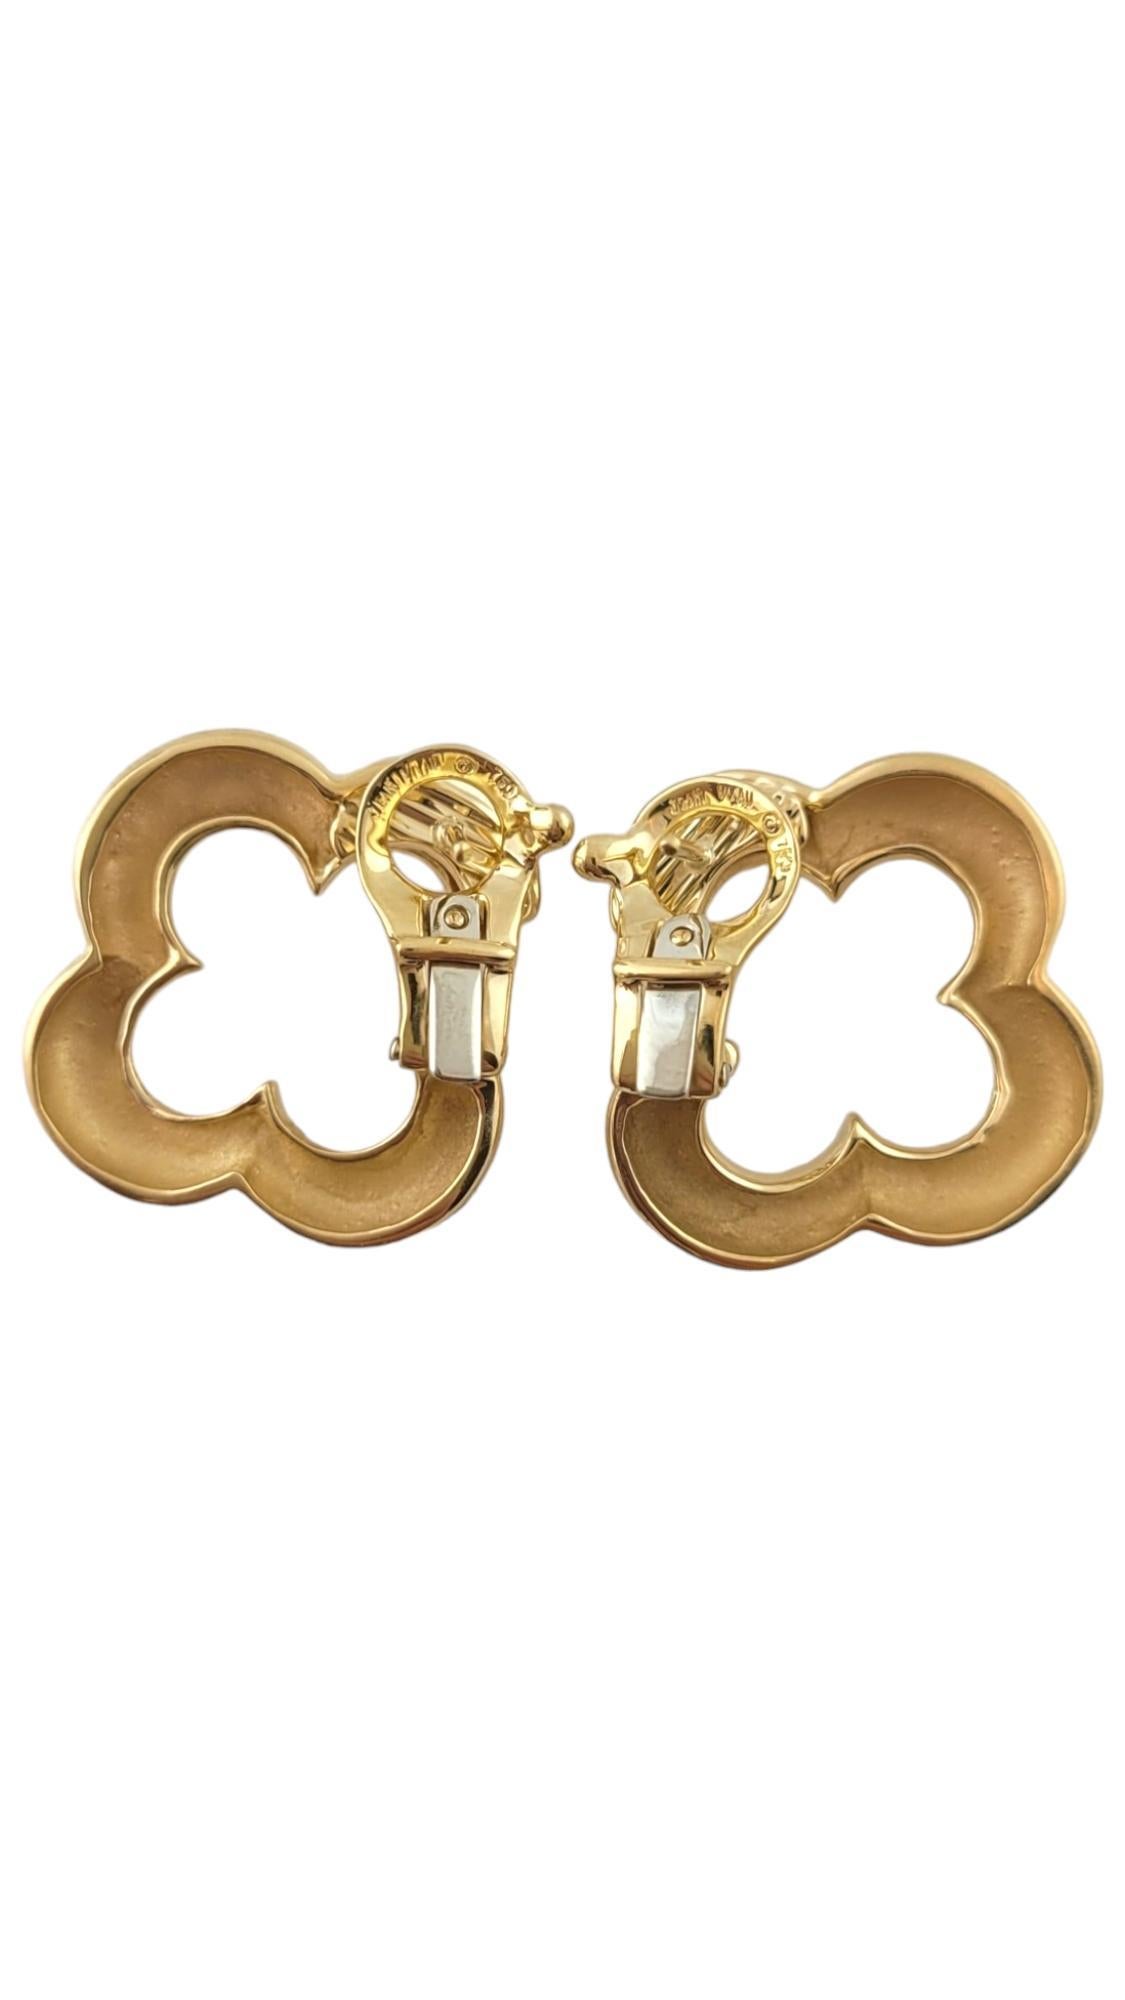 18K Yellow Gold Jean Vitale Clover Earrings #17398 In Good Condition For Sale In Washington Depot, CT